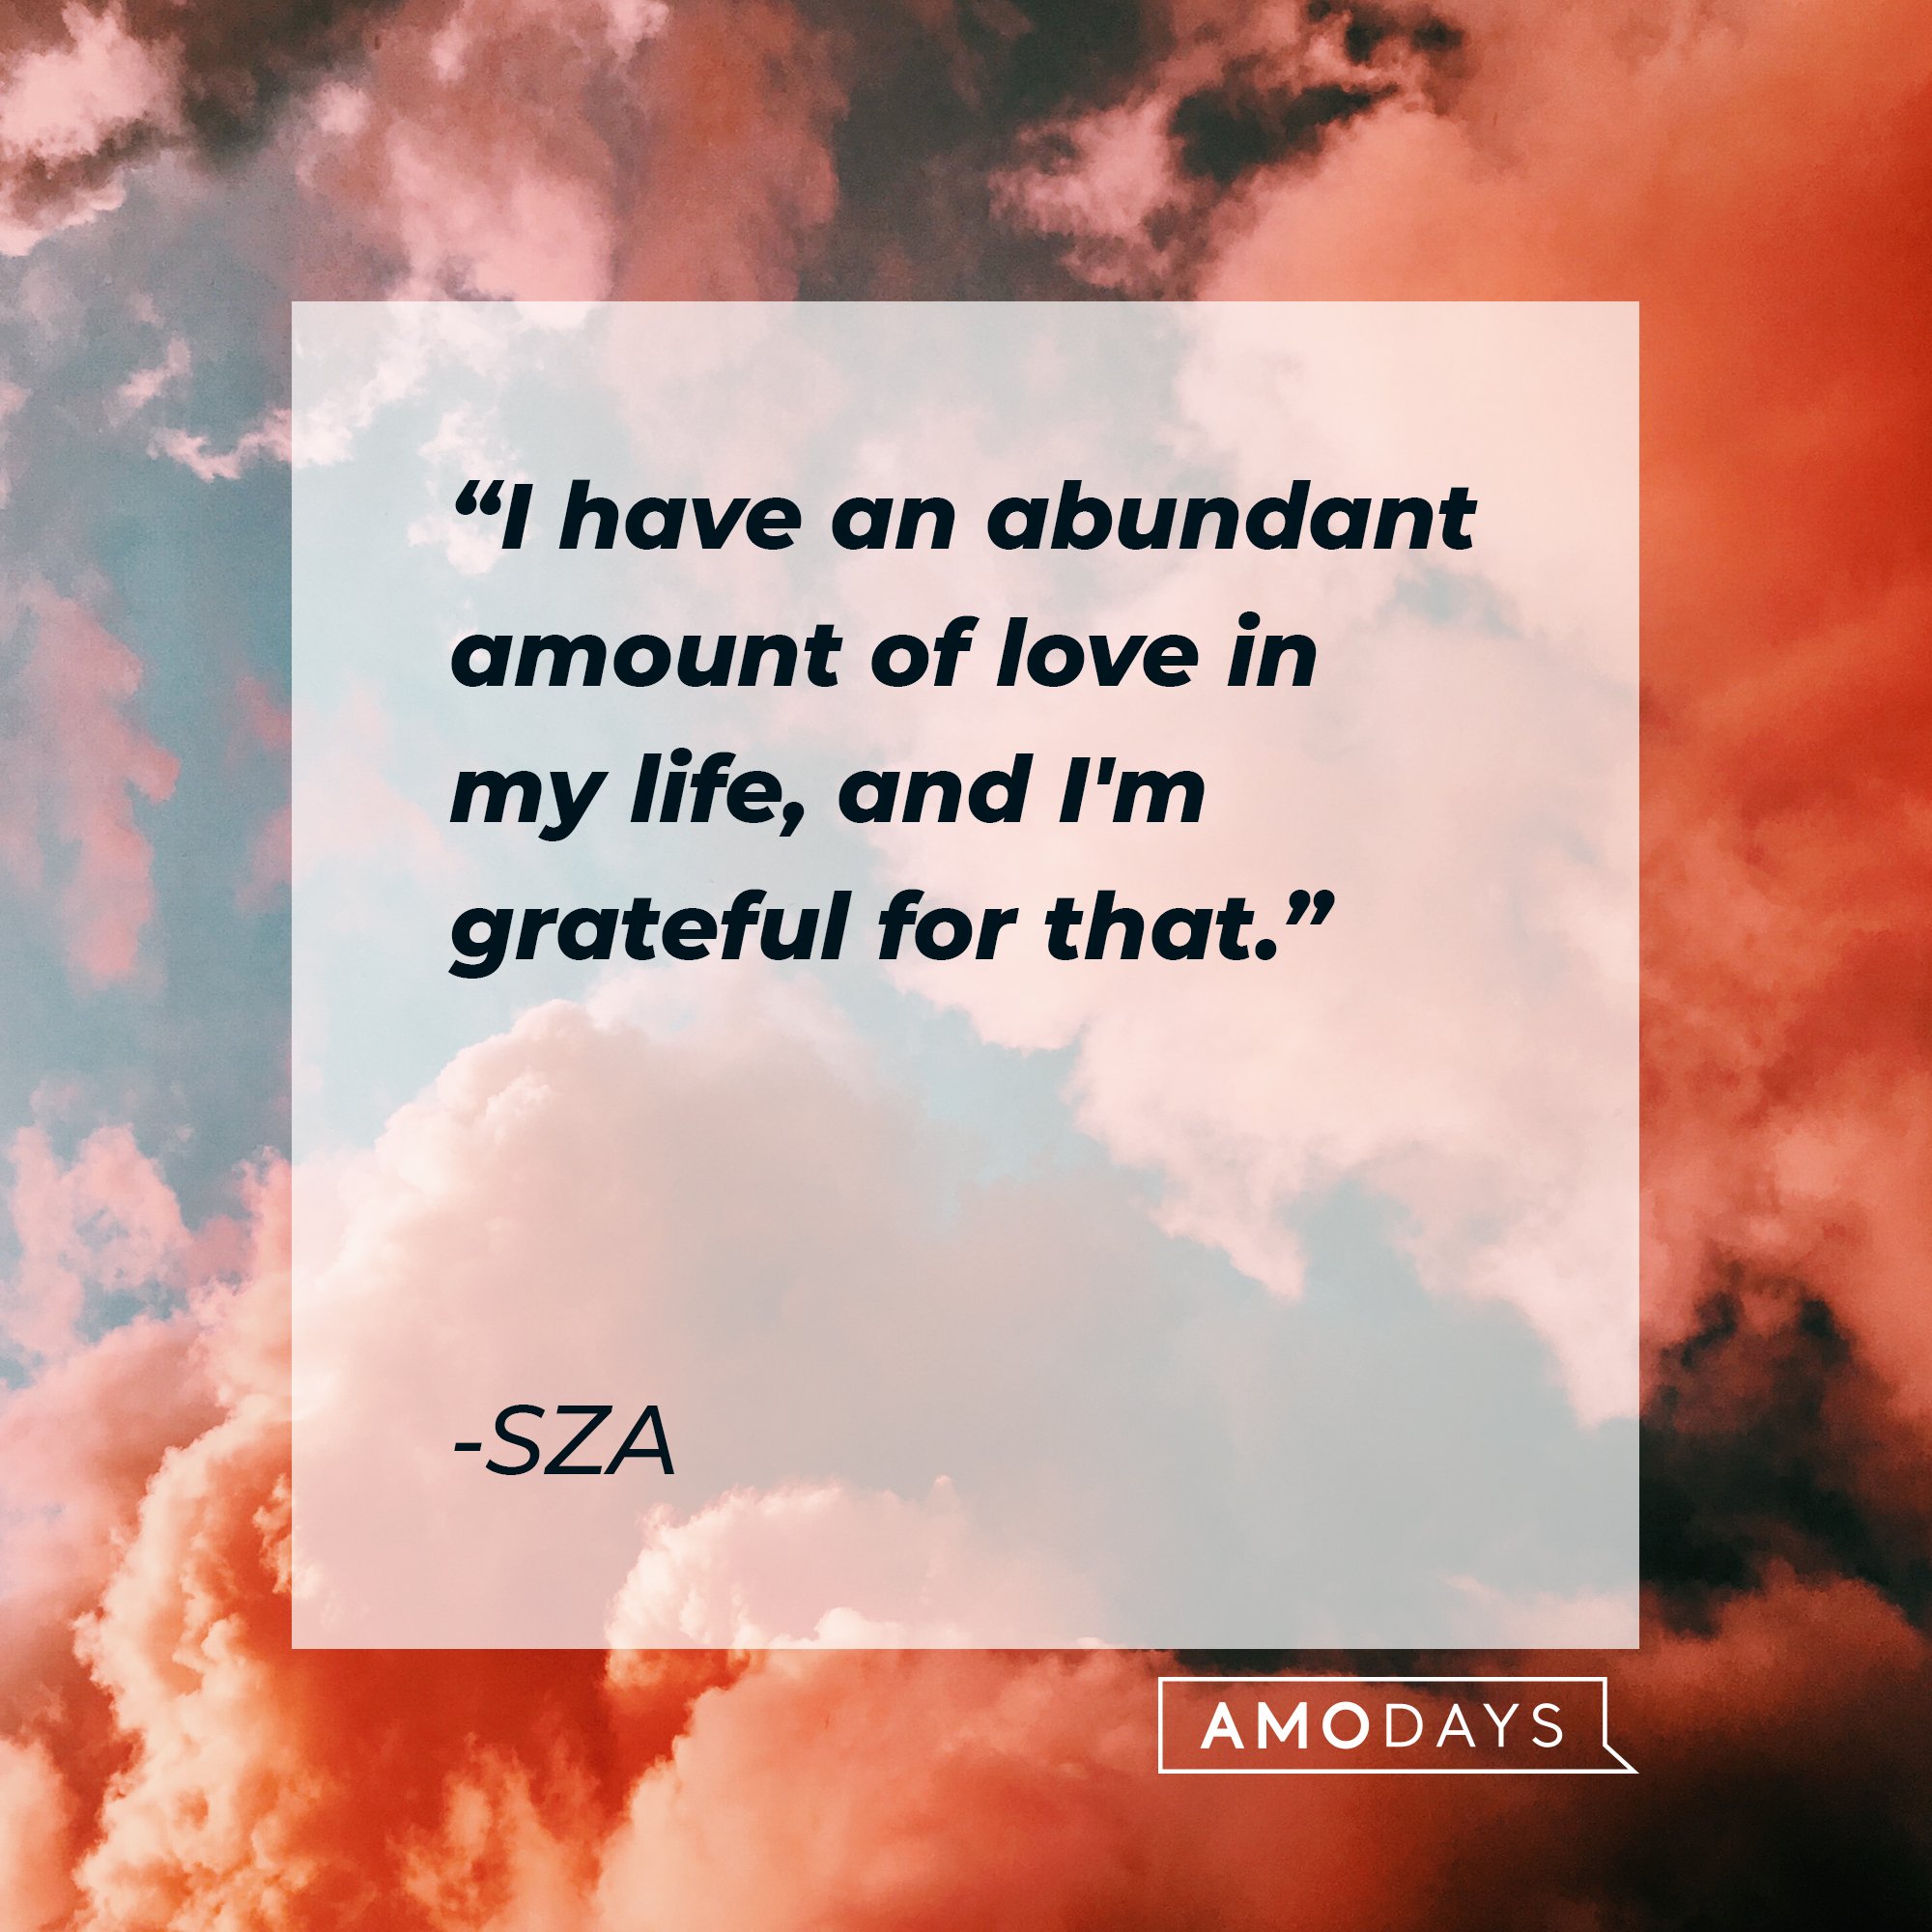 SZA's quote: "I have an abundant amount of love in my life, and I'm grateful for that." | Image: AmoDays